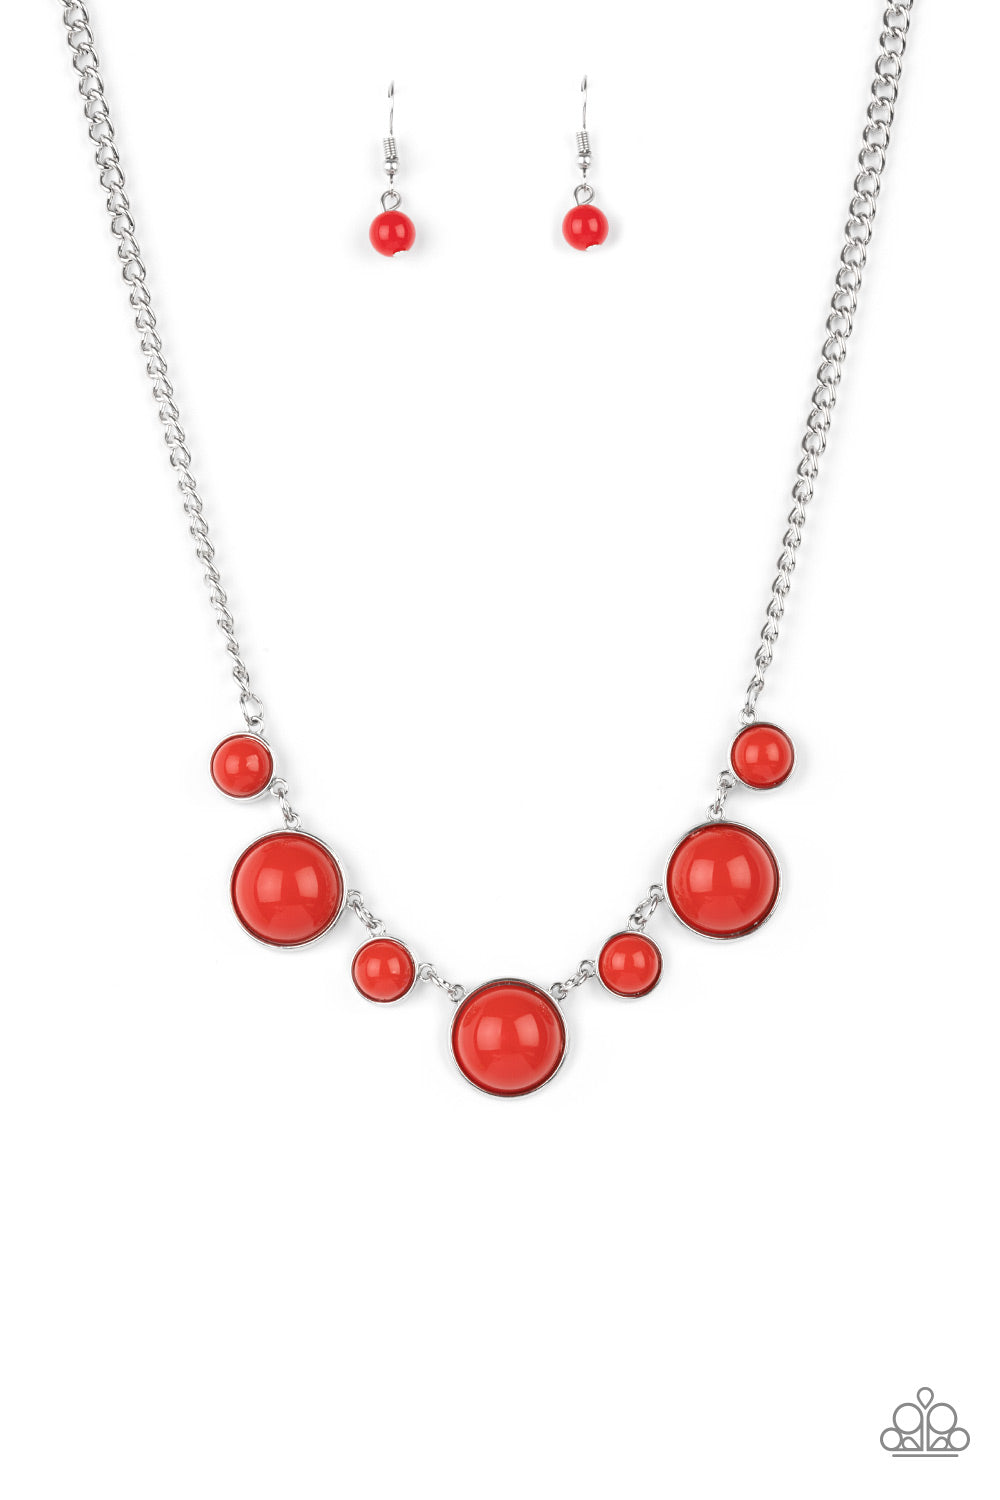 Prismatically POP-tastic - red - Paparazzi necklace